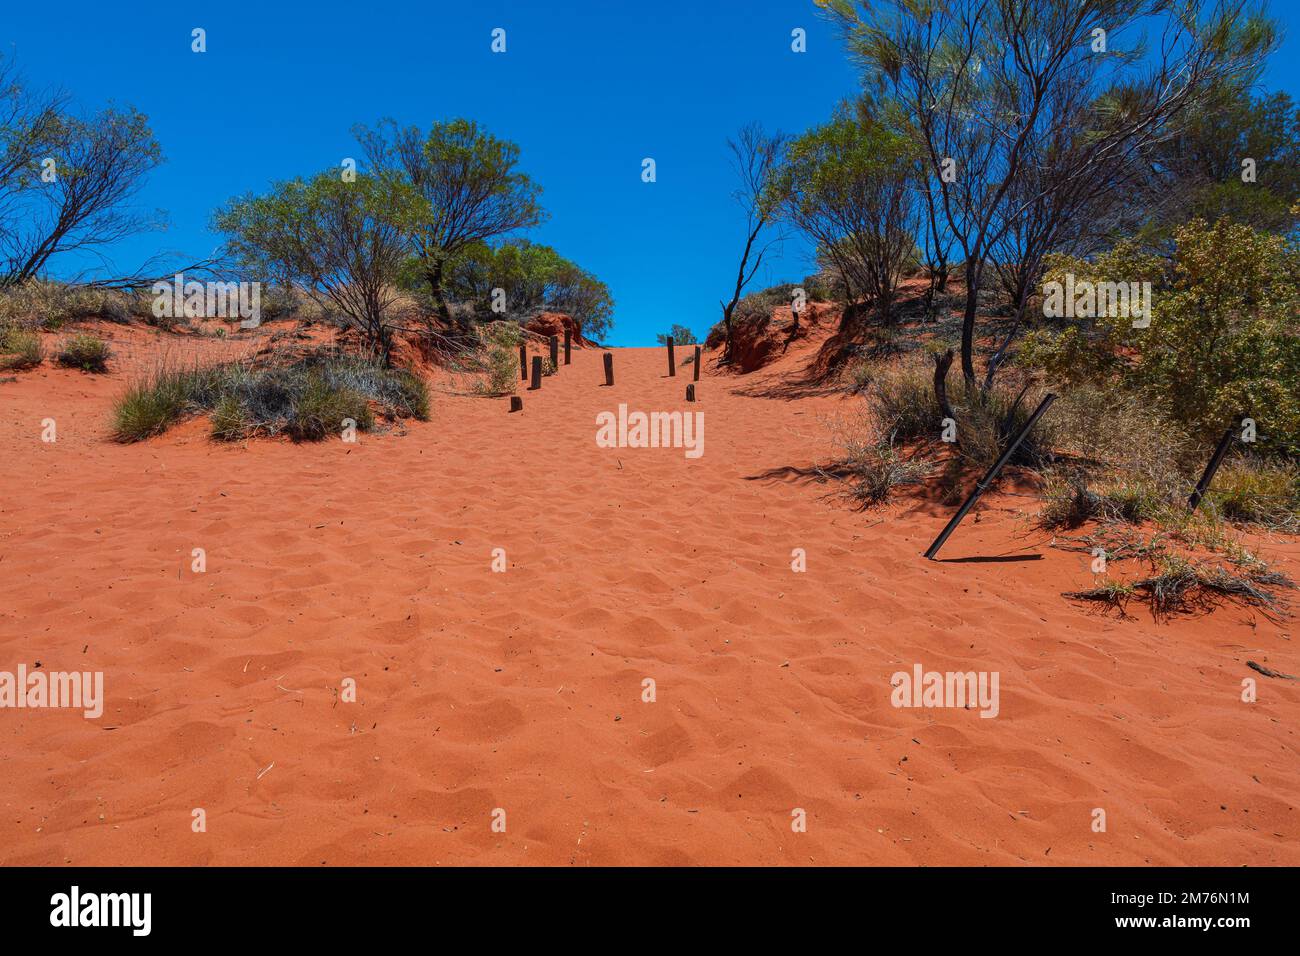 Sand dune beside the Stuart Highway. Behind the dune stretches a dry salt lake. Outback central Australia. Red sand and barren vegetation under blue s Stock Photo